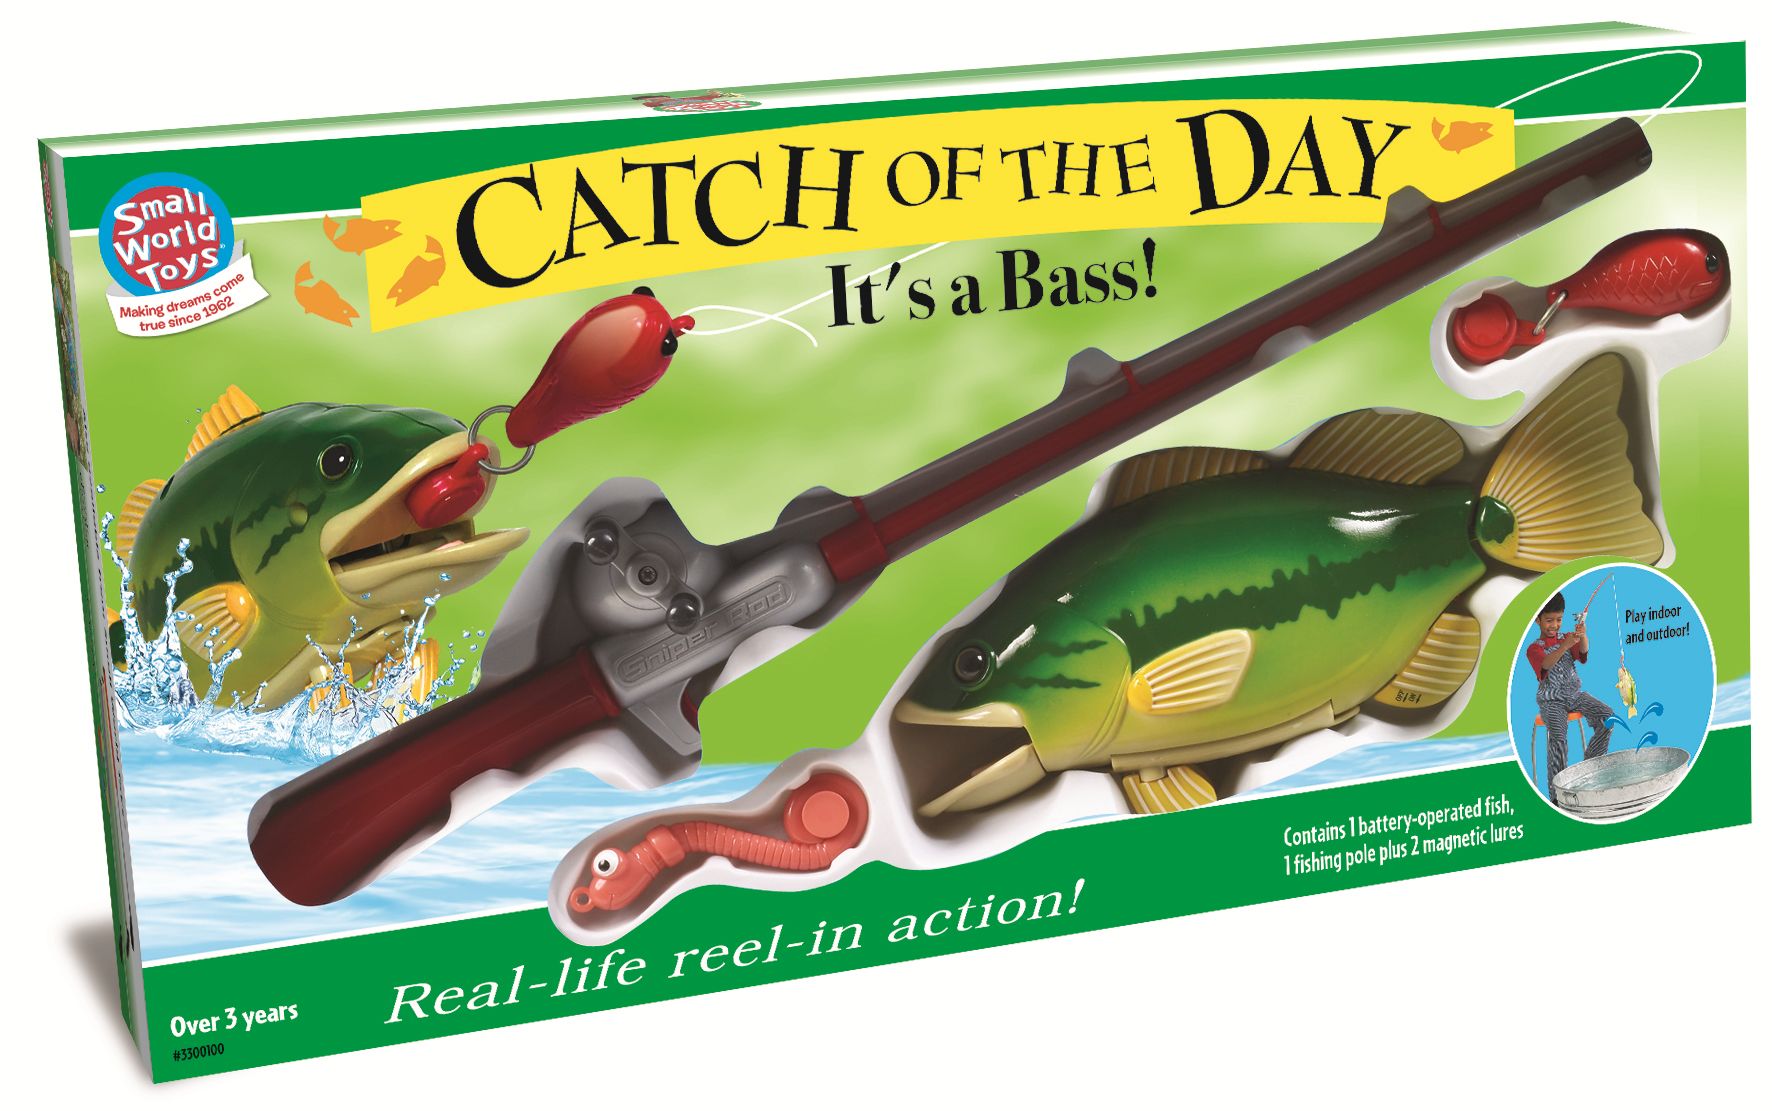 Small World Toys Catch of the Day Real Action Fishing Toy, Price/each Sale,  Reviews. - Opentip